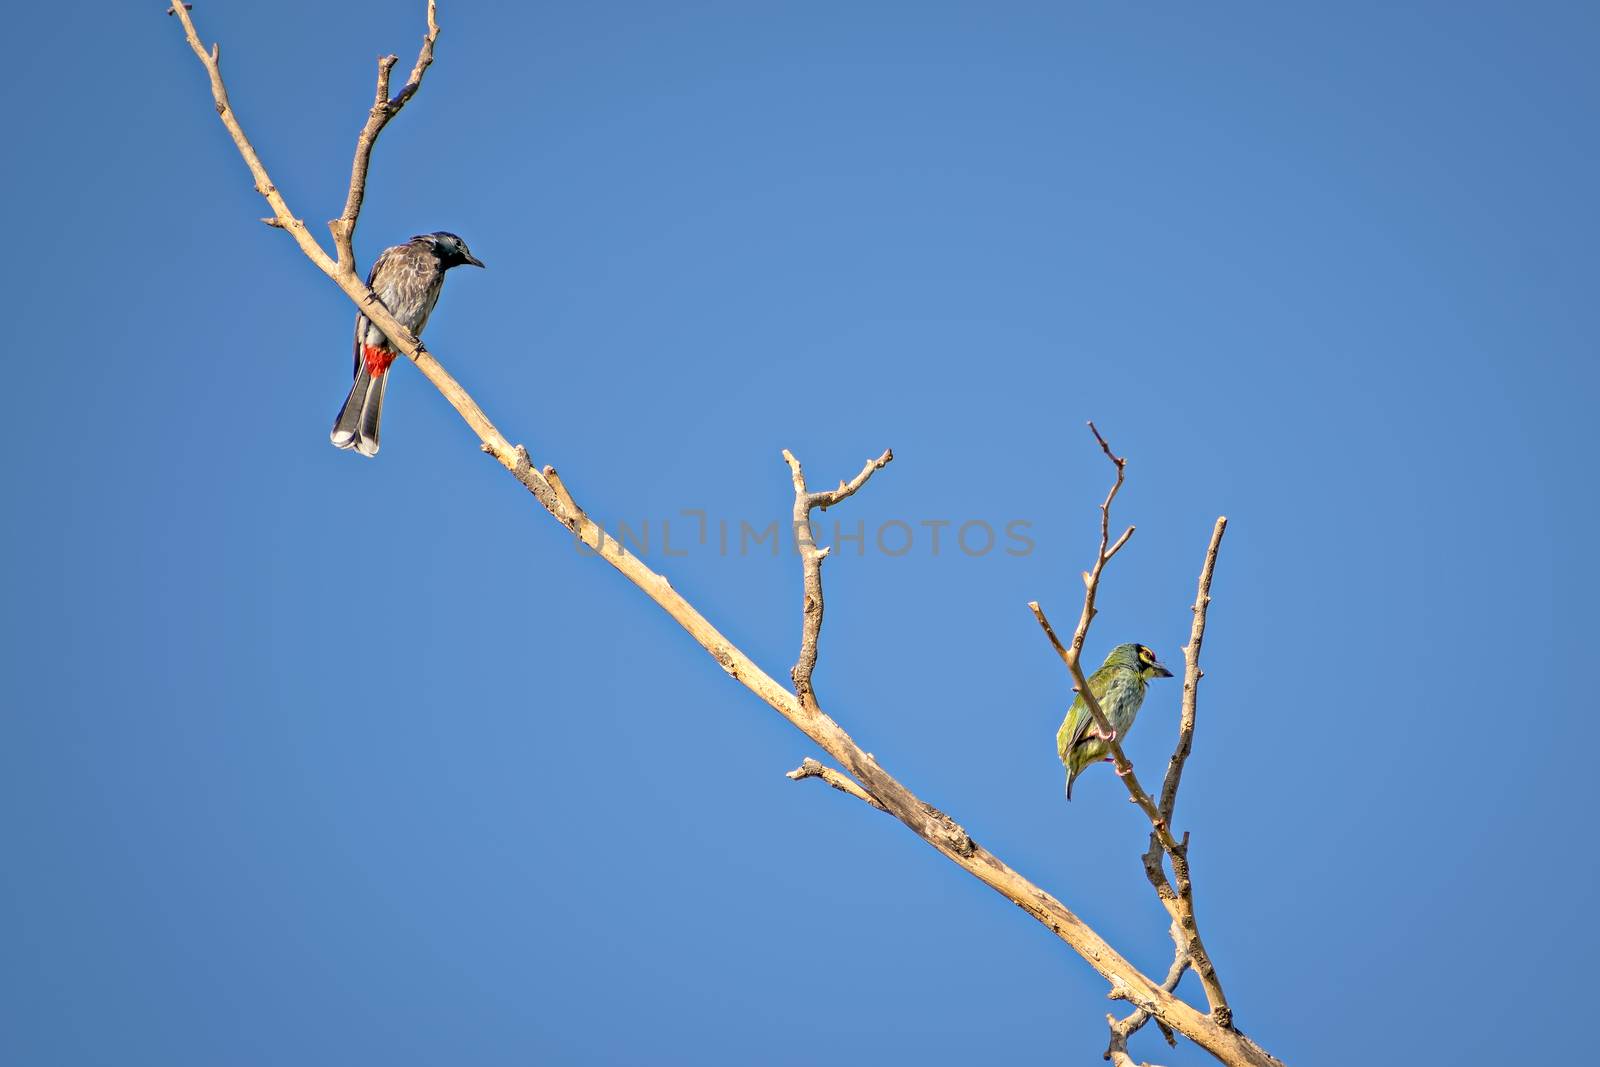 Red vented bulbul & copper smith barbet bird, sitting on a dry tree branch with clear blue sky background..